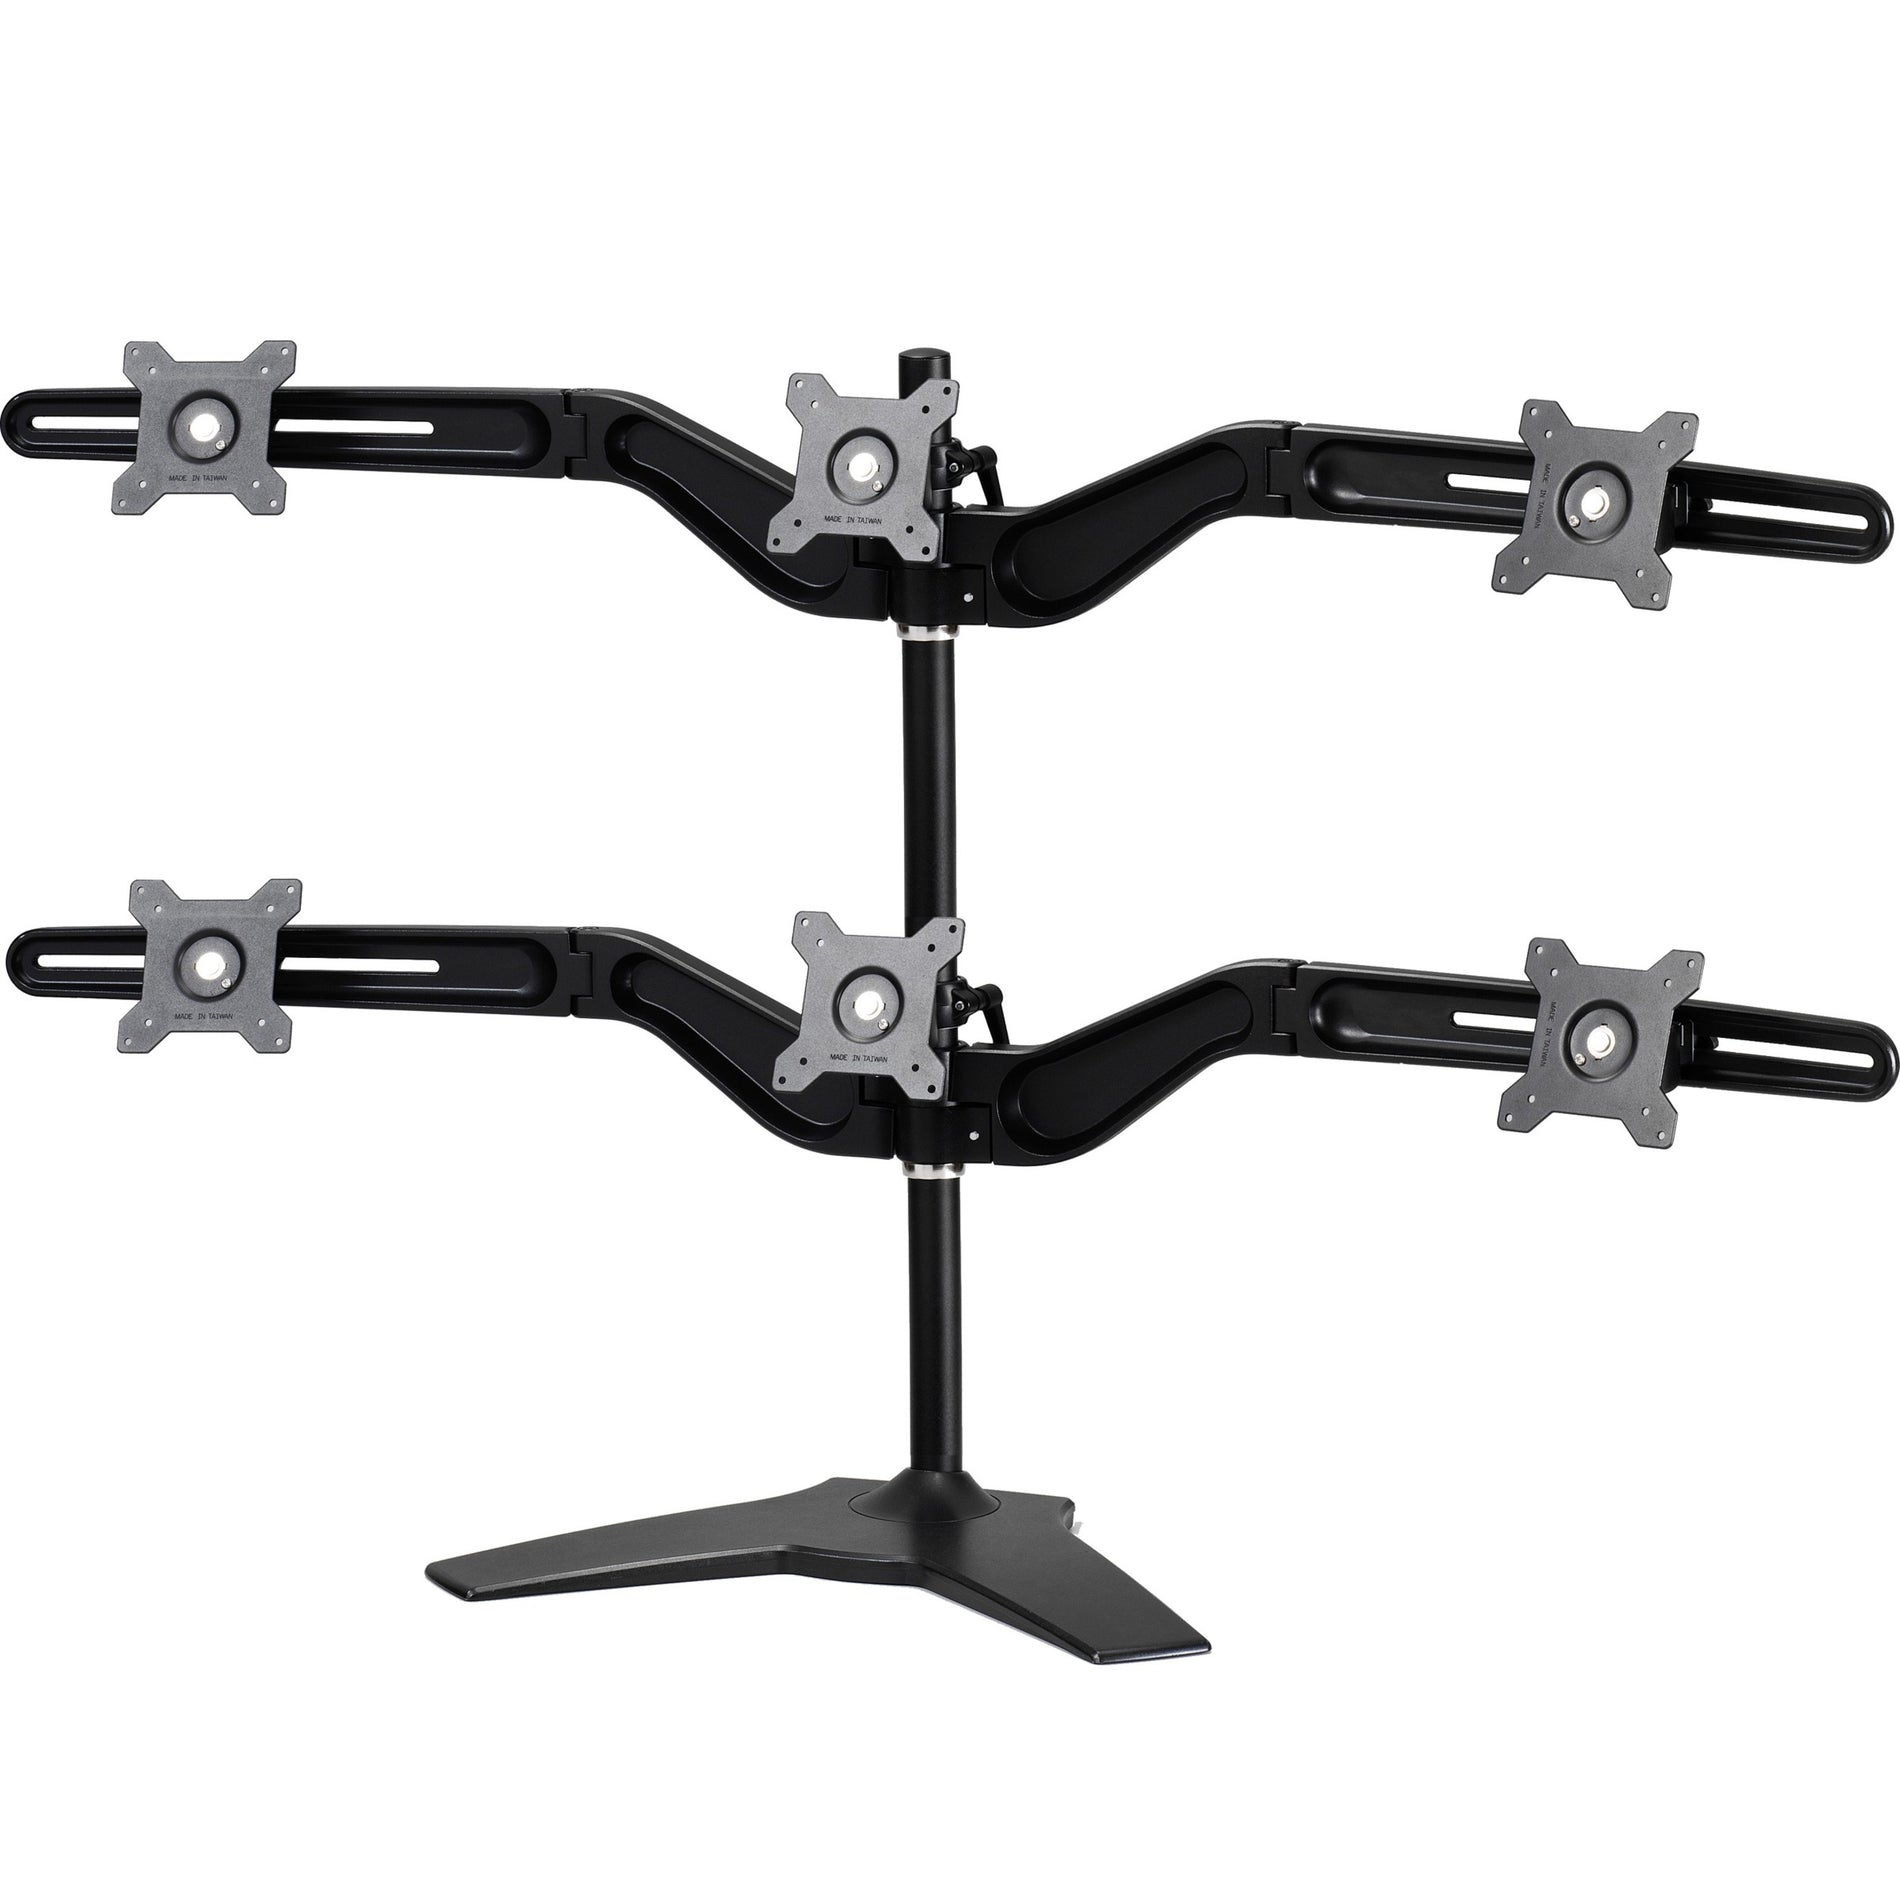 Amer Mounts AMR6S Stand Based Hex Monitor Mount Up to 24", 13.2lb Monitors, Easy Install, Smart Torque Adjust, 360 Degree Rotation, Smart Cable Management